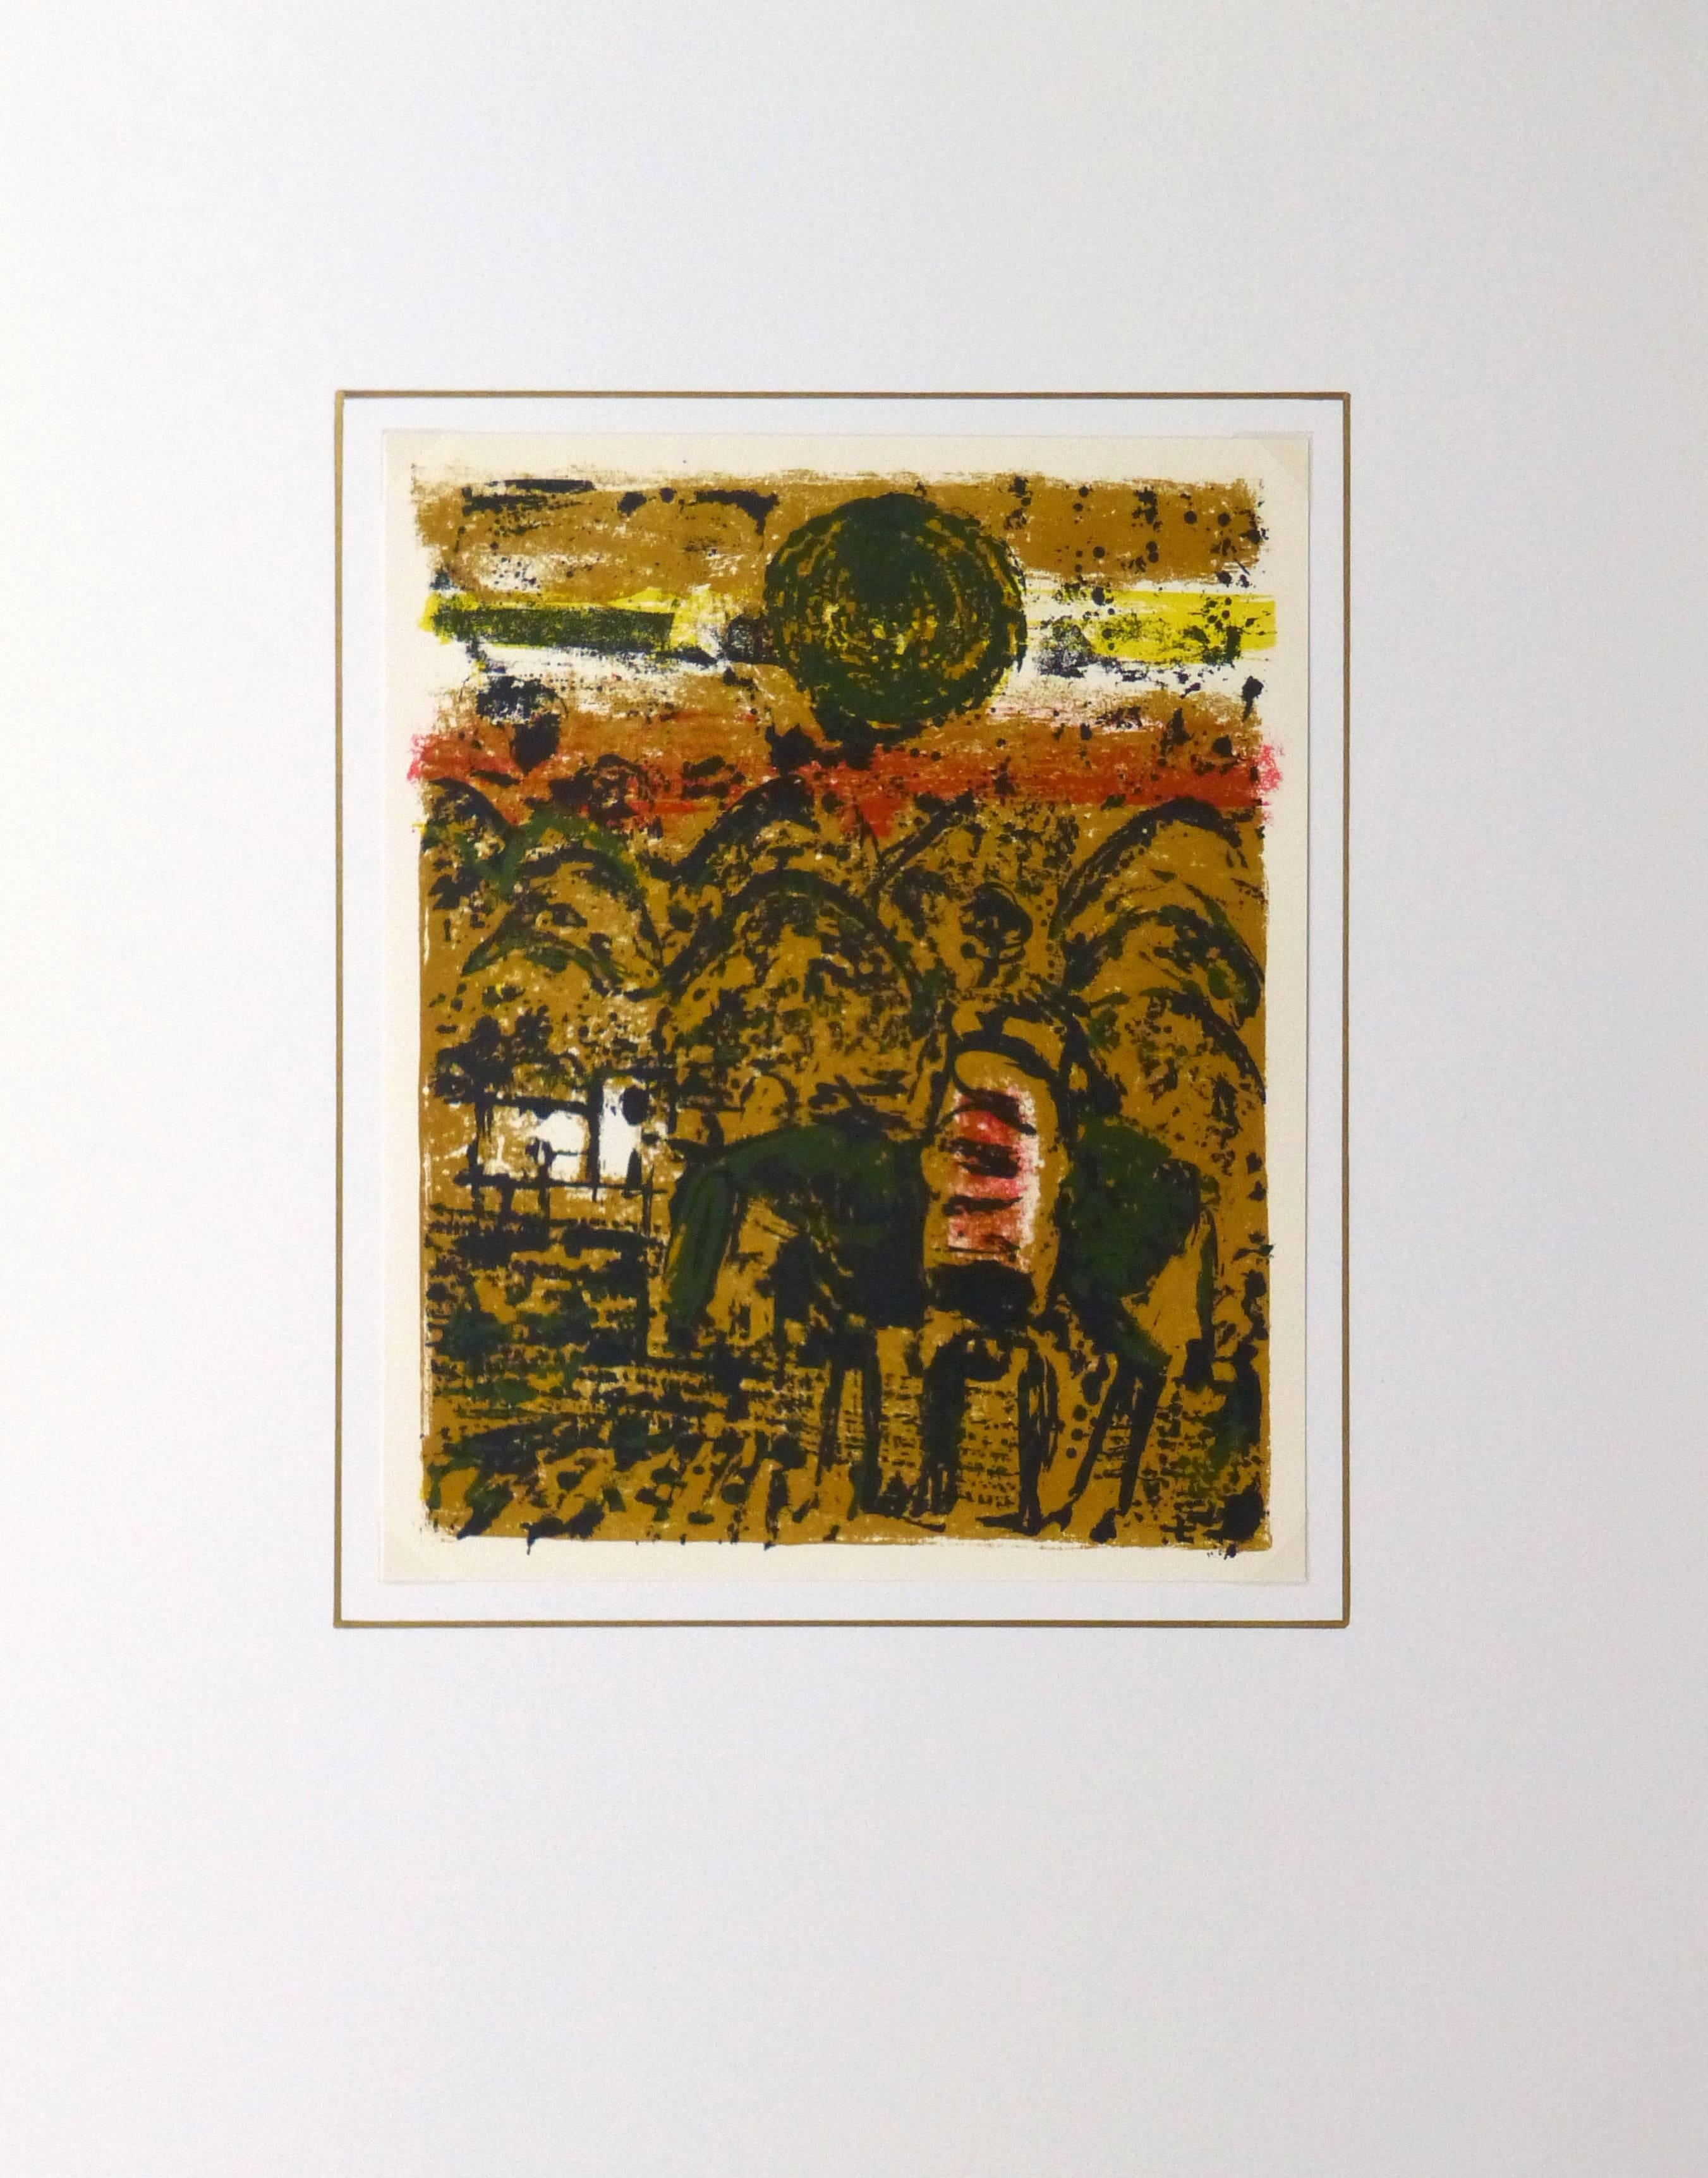 Inviting fine art French lithograph of a figure on horseback backed by a mid day sun over the mountains by artist Paul Guiramand, circa 1965.

Original artwork on paper displayed on a white mat with a gold border. Archival plastic sleeve and